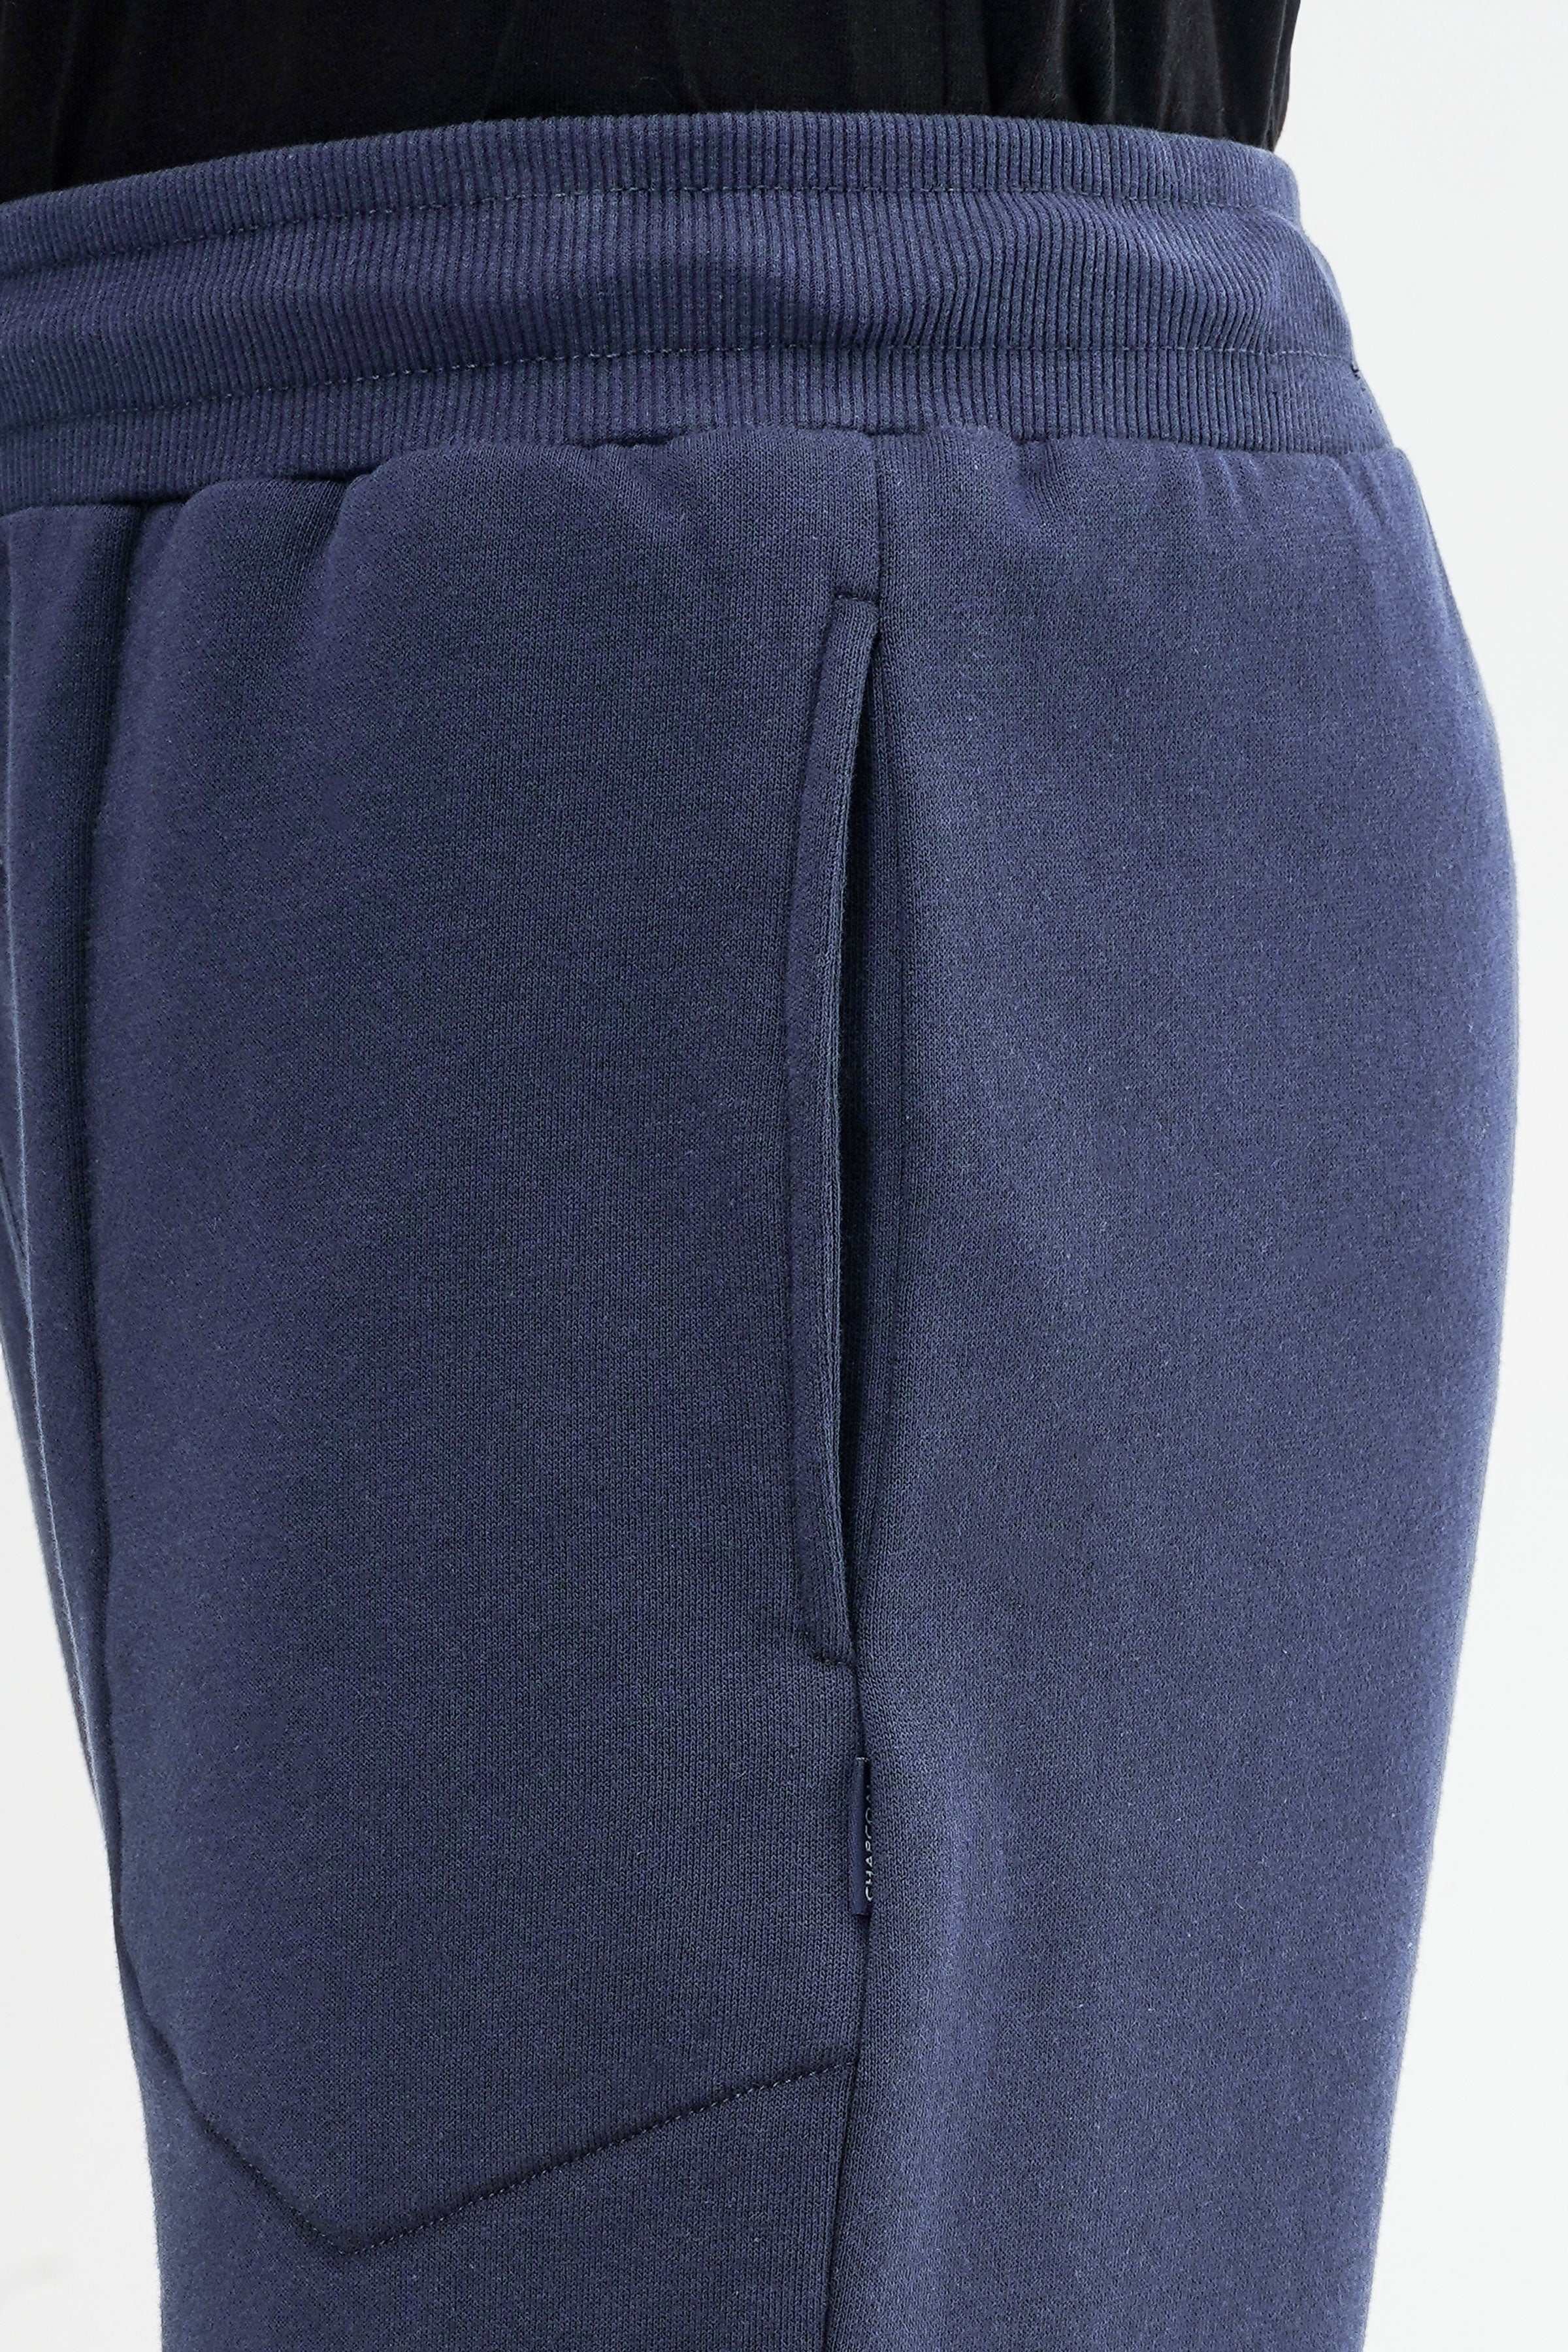 TERRY FLEECE JOGGER TROUSER NAVY at Charcoal Clothing